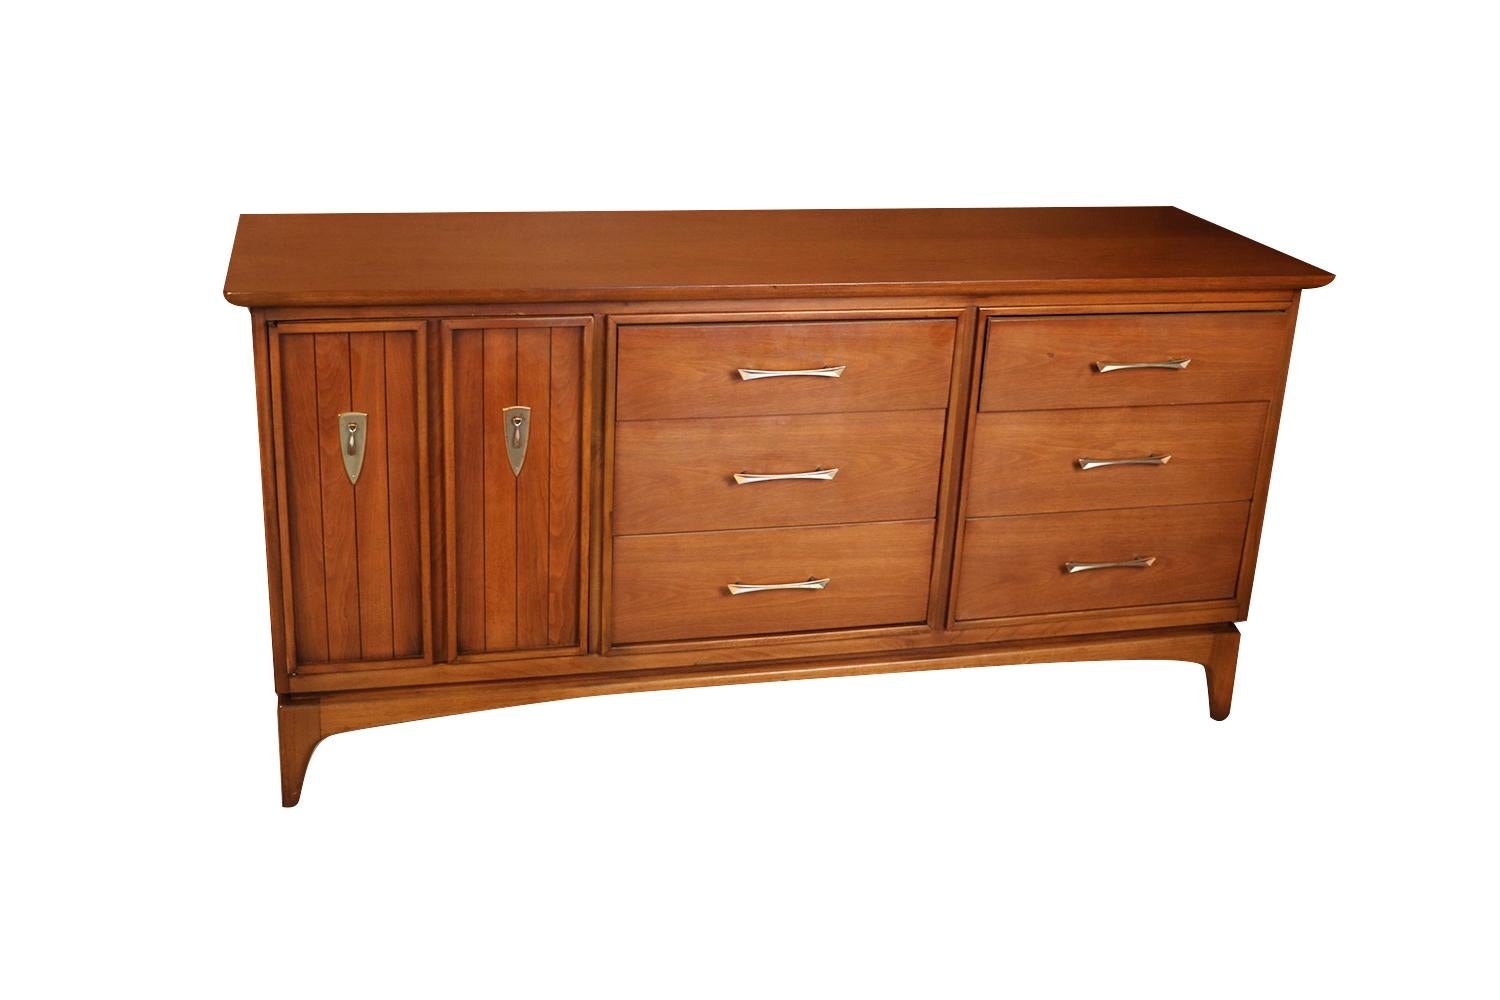 Mid-Century Modern dresser, the “Wharton” line by Kent Coffey. Minimalist Danish Modern inspired profile. A handsome example of American craftsmanship. Stunning walnut dresser with copper accents. Exquisitely designed with incredible lines and